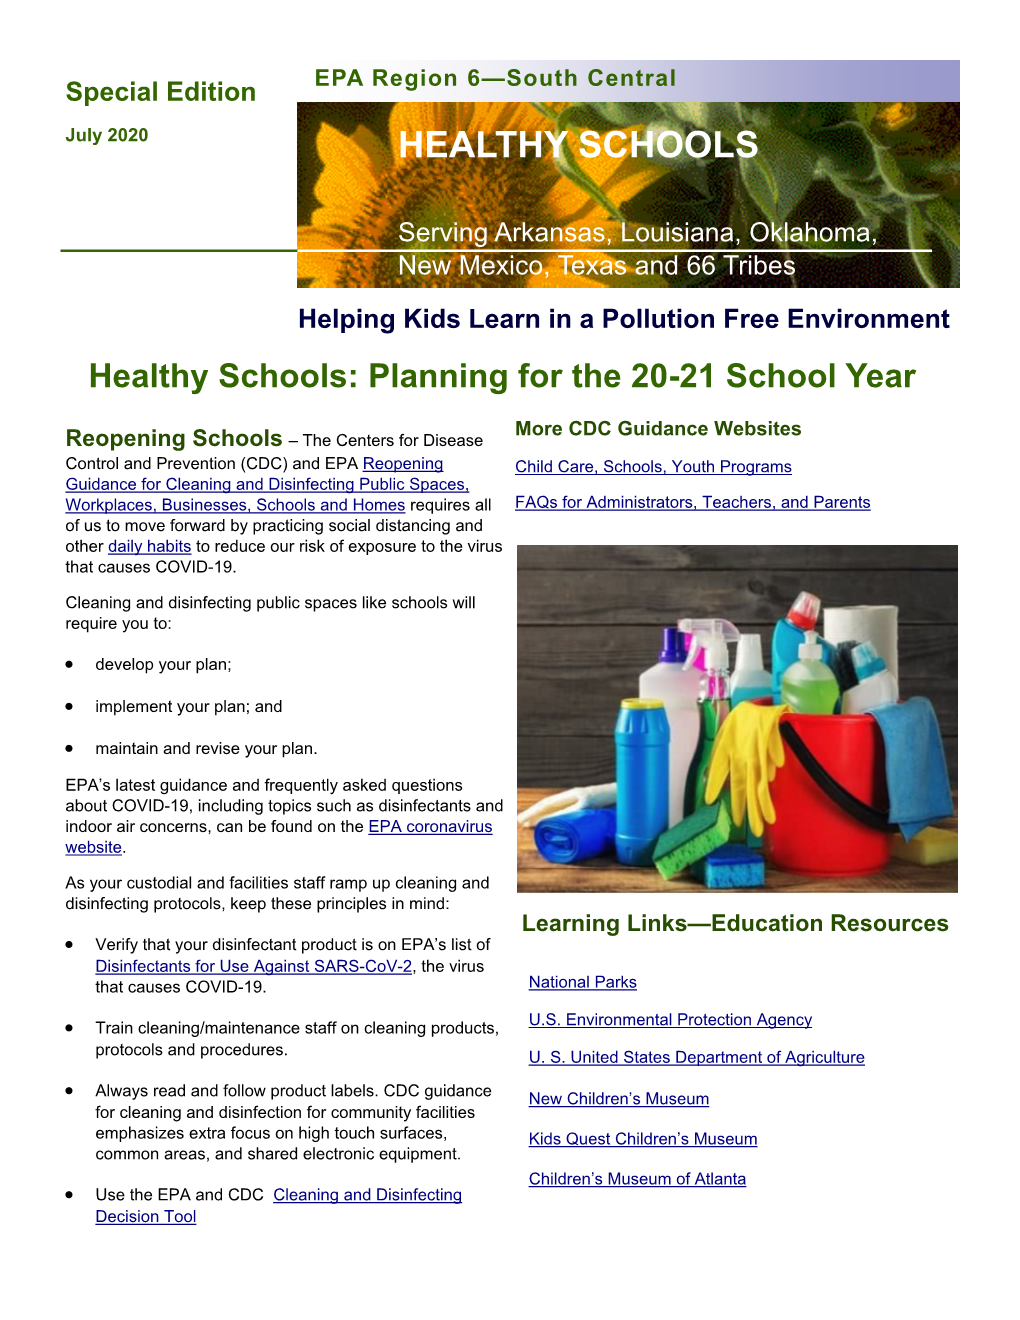 Healthy Schools Newsletter, Special Edition July 2020